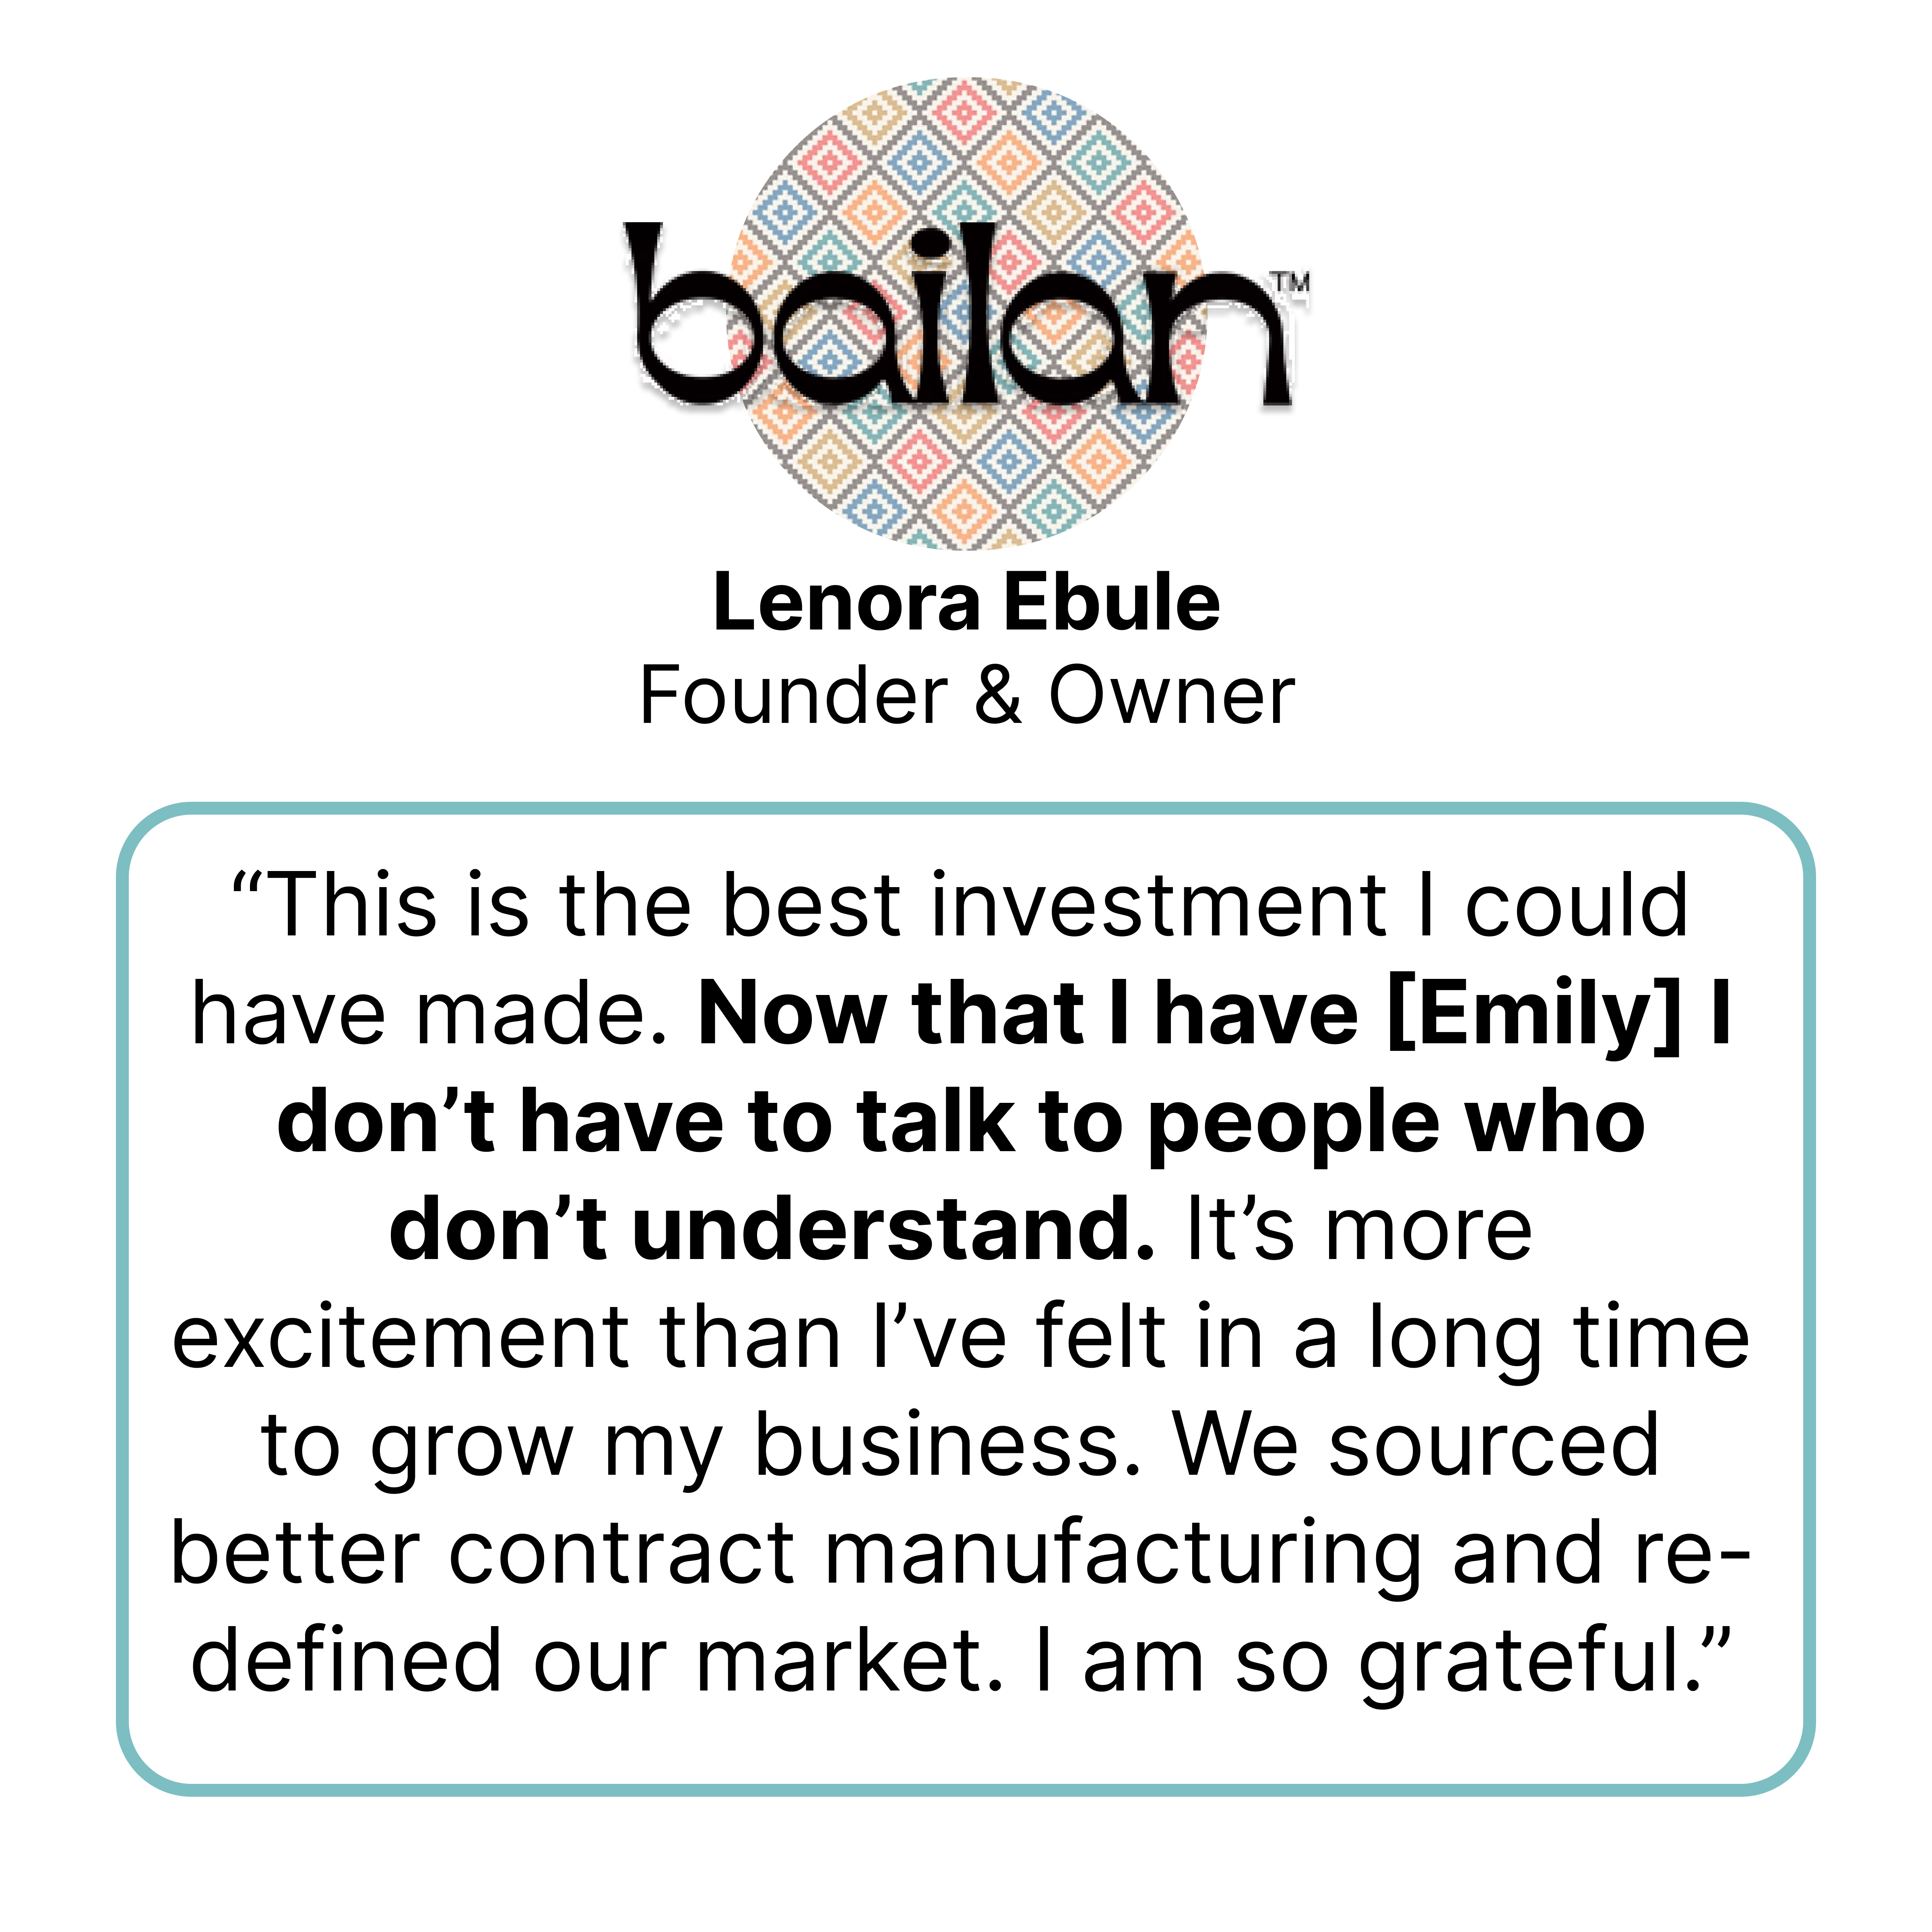 Client review of working with Emily Anne Page as a Business Growth Consultant. Lenora Able, Bailan